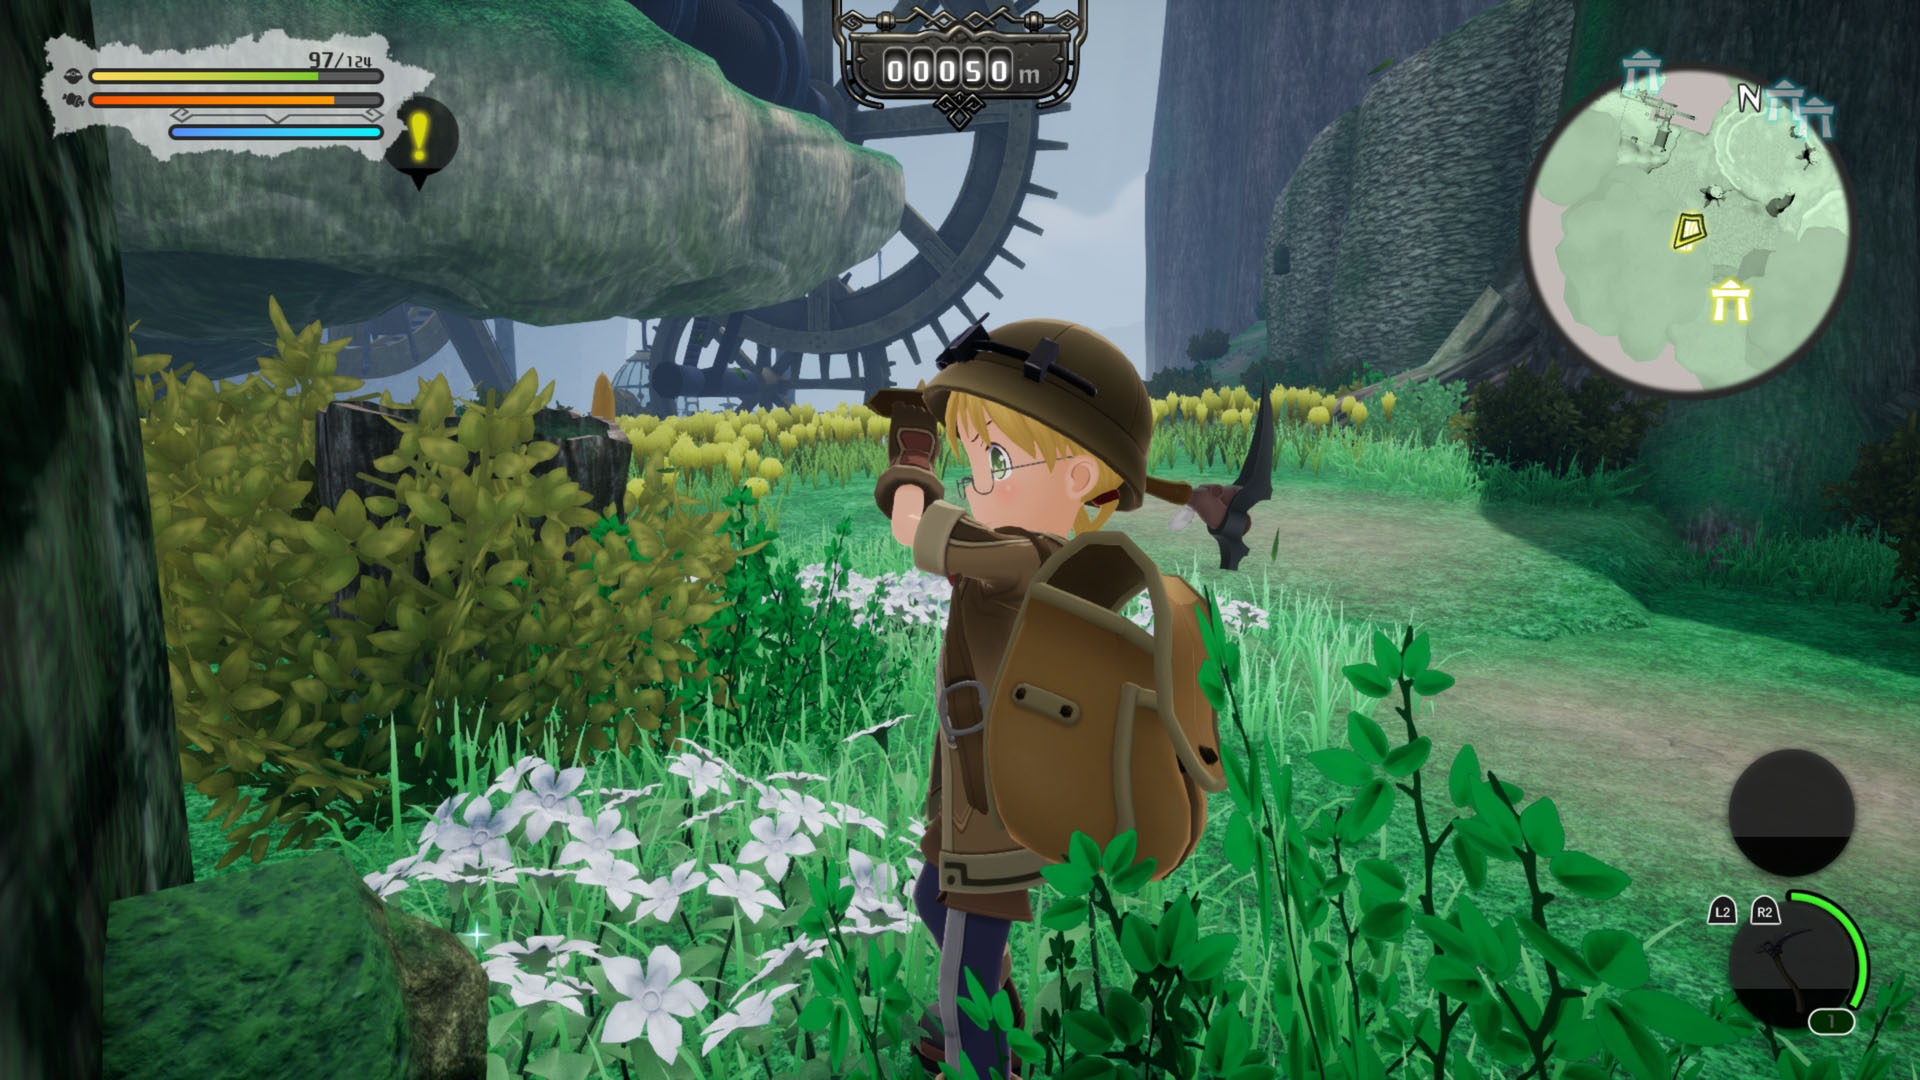 Made in Abyss: Binary Star Falling into Darkness main gameplay modes detailed